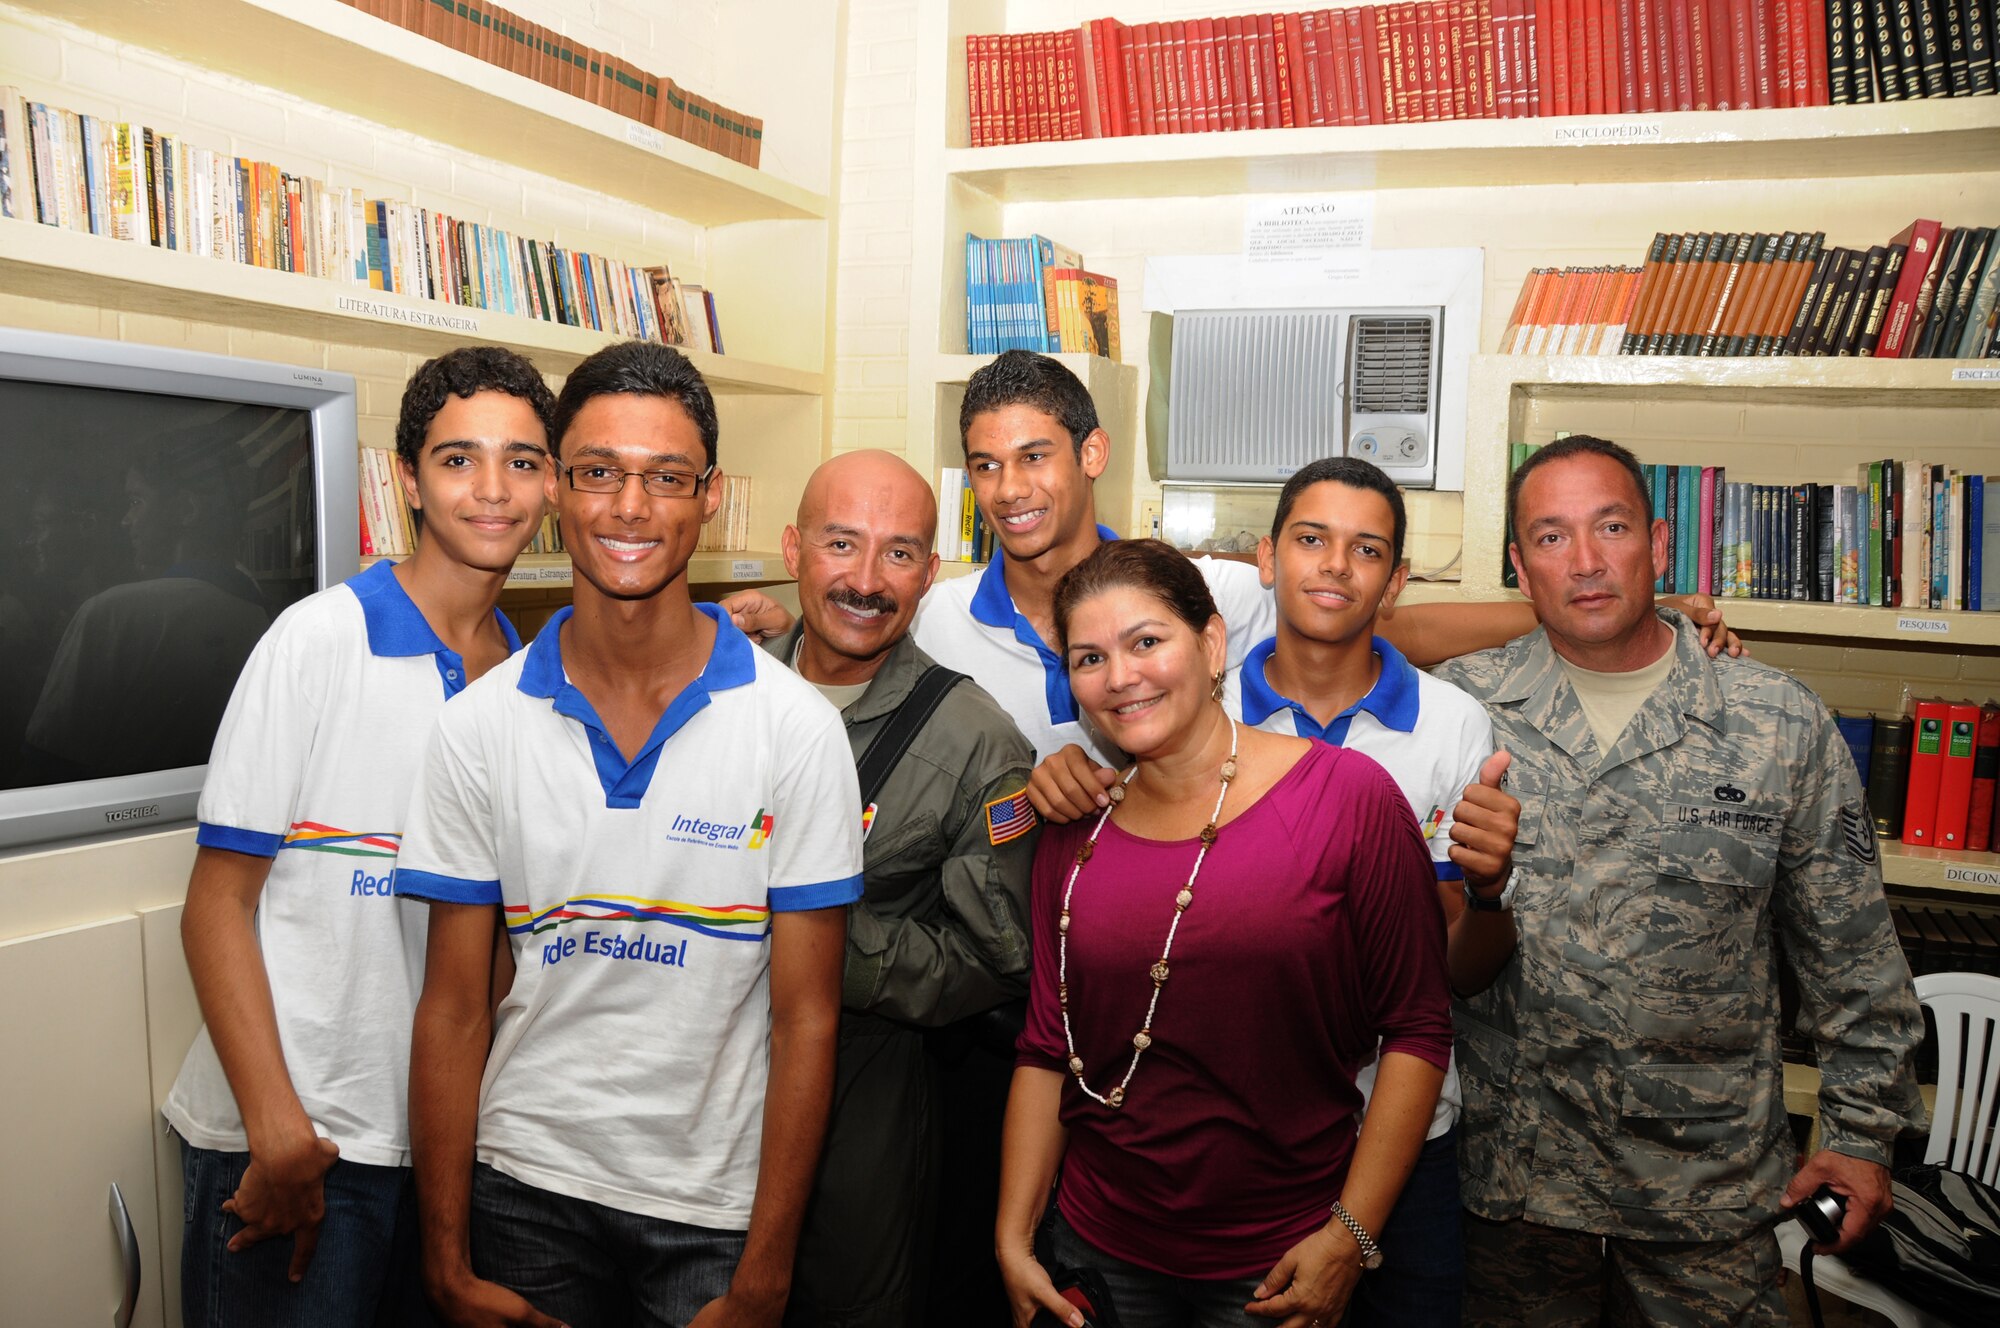 master Sgt. Johnny Narro and Technical Sgt. Guillermo Celaya from 161st Air Refueling Wing, Phoenix, Ariz., pose with students and their teacher Giselda Vila Nova from Escola Santos Dumont School on November 11, 2010, in Recife, Brazil . The 161st ARW is participating in CRUZEX V, or Cruzeiro Do Sul (Southern Cross).  CRUZEX  is a multi-national combined exercise involving the Air Forces of Argentina, Brazil, Chile, France and Uruguay, and observers from numerous other countries with more than 82 aircraft and almost 3,000 Airmen involved.  U.S. Air Force Photo by Master Sgt. Kelly M. Deitloff